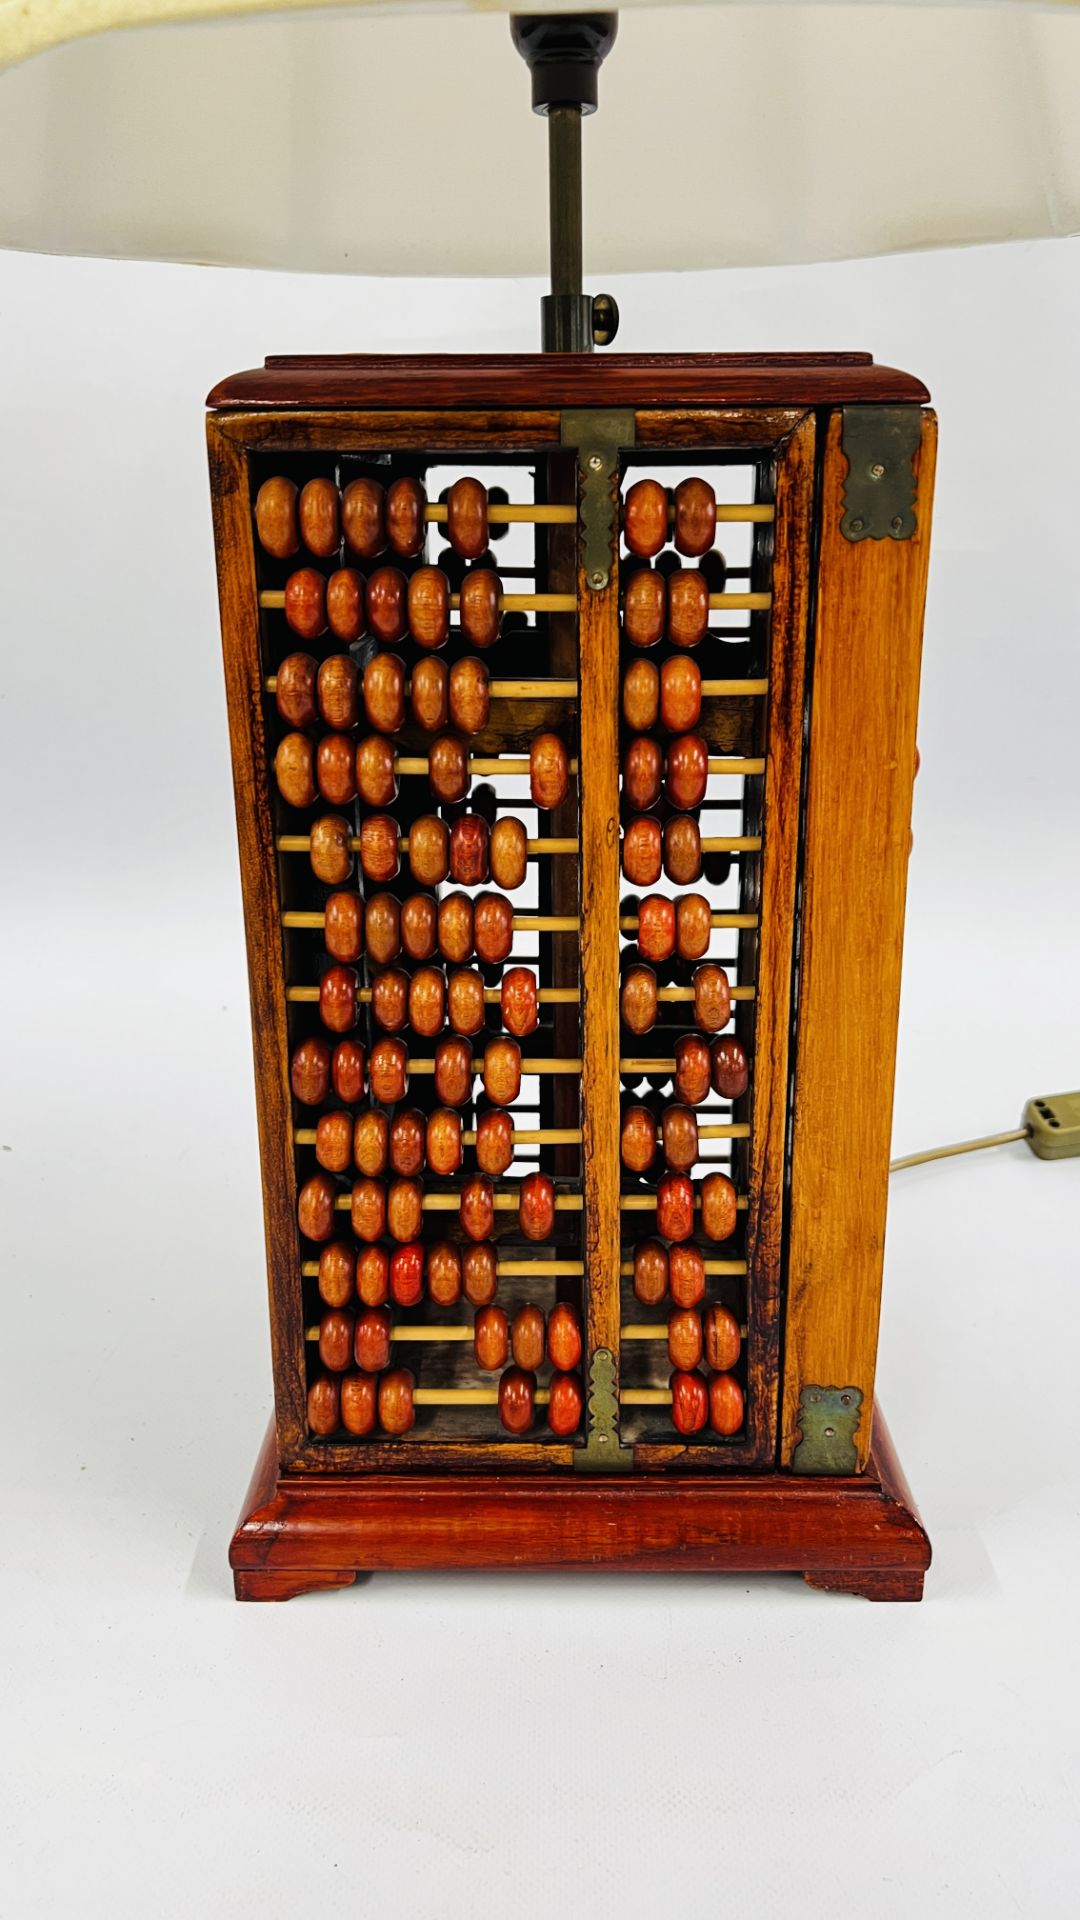 A NOVELTY CONVERTED LAMP FROM 4 ABACUS BOARDS WITH SHADE - WIRE REMOVED - SOLD AS SEEN. - Image 2 of 5